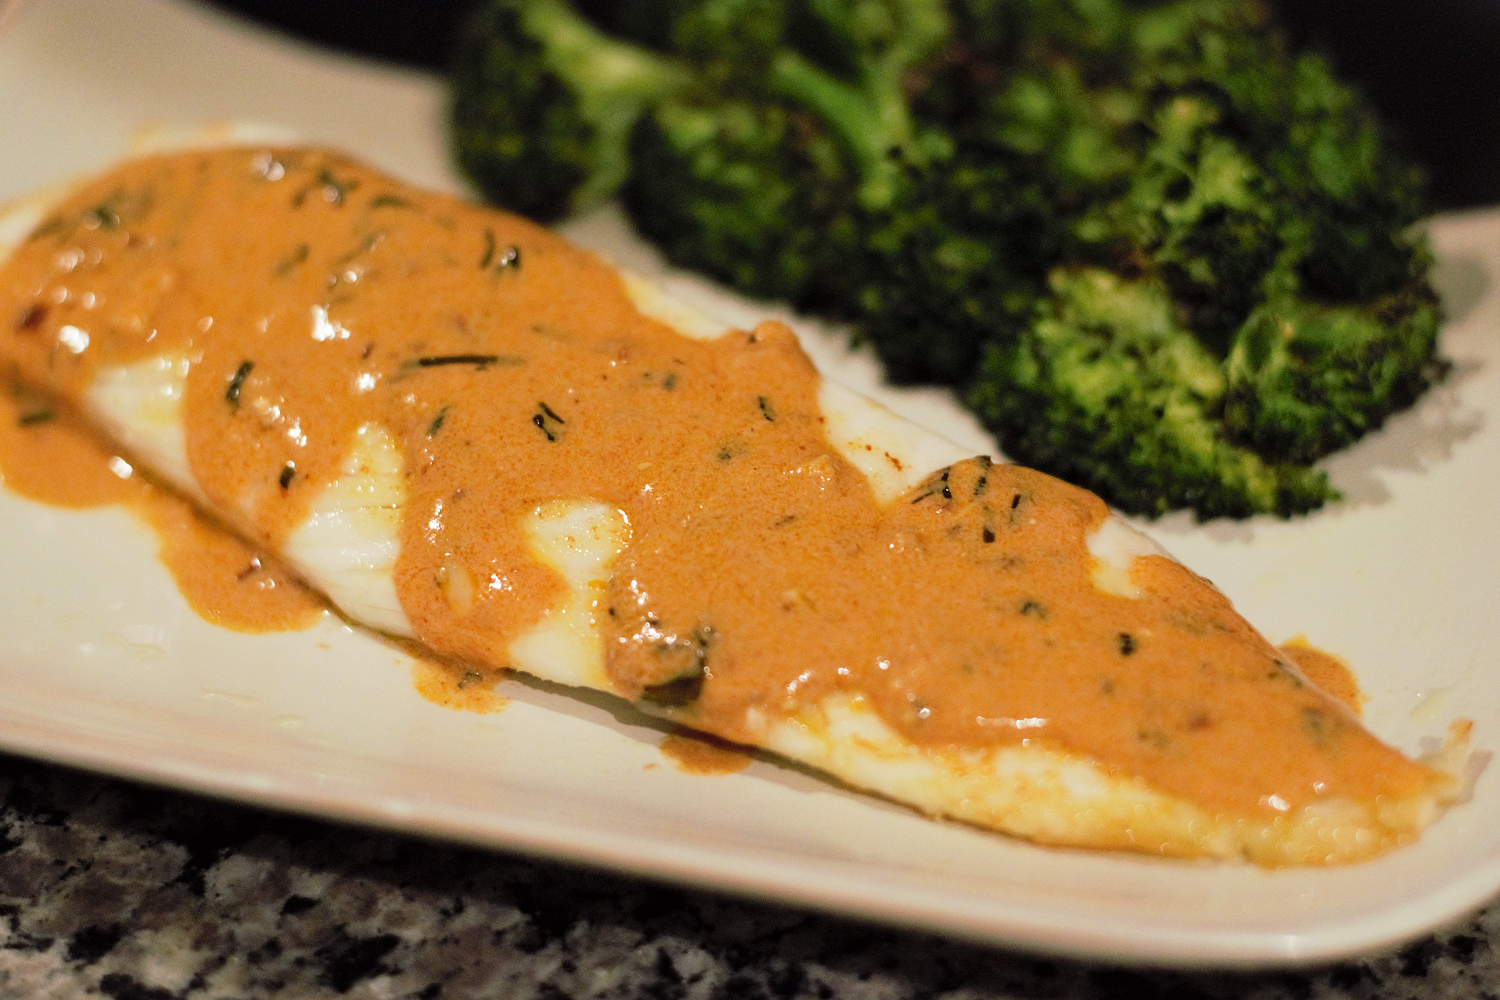 Creamy sauce built around sun-dried tomatoes – or just a simple paste! – is perfect for smothering fish or chicken.